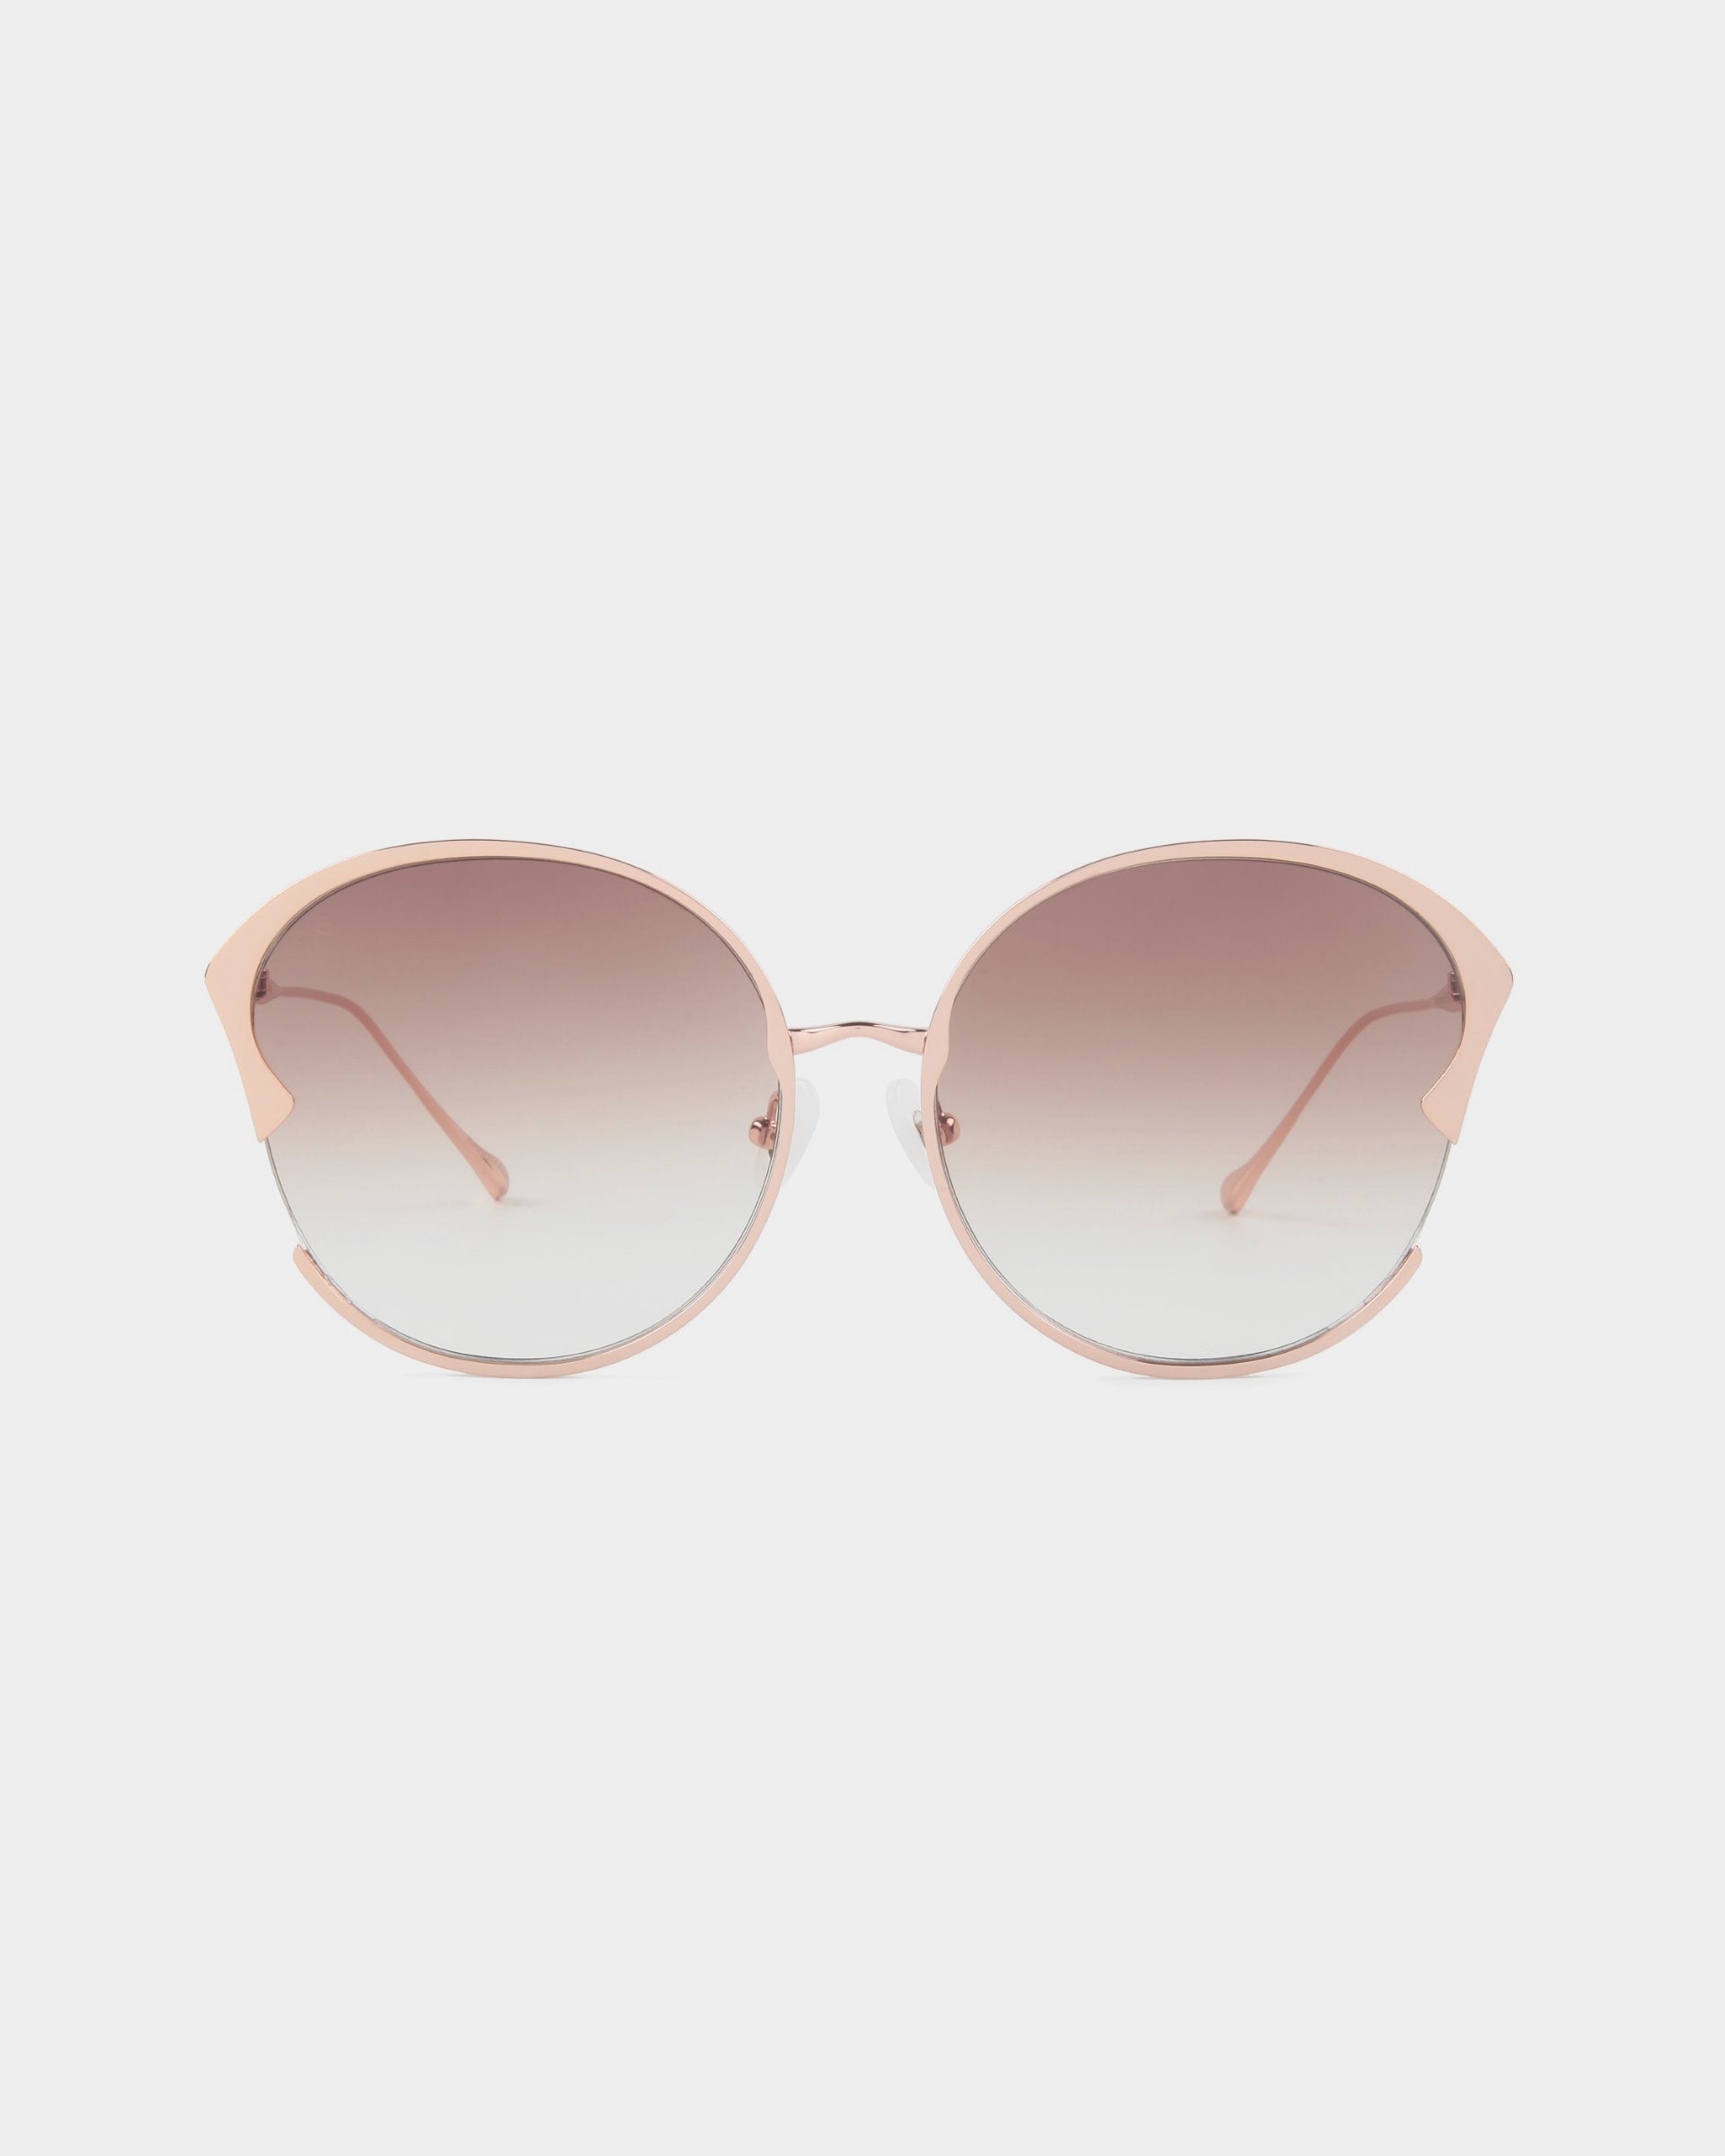 A pair of stylish For Art's Sake® Alectrona sunglasses with large, round, gradient lenses transitioning from dark to light shades. The frame is a light pink metal with a subtle cat-eye shape, featuring 18-karat gold-plated temples that are slim and matching in color. The background is white.